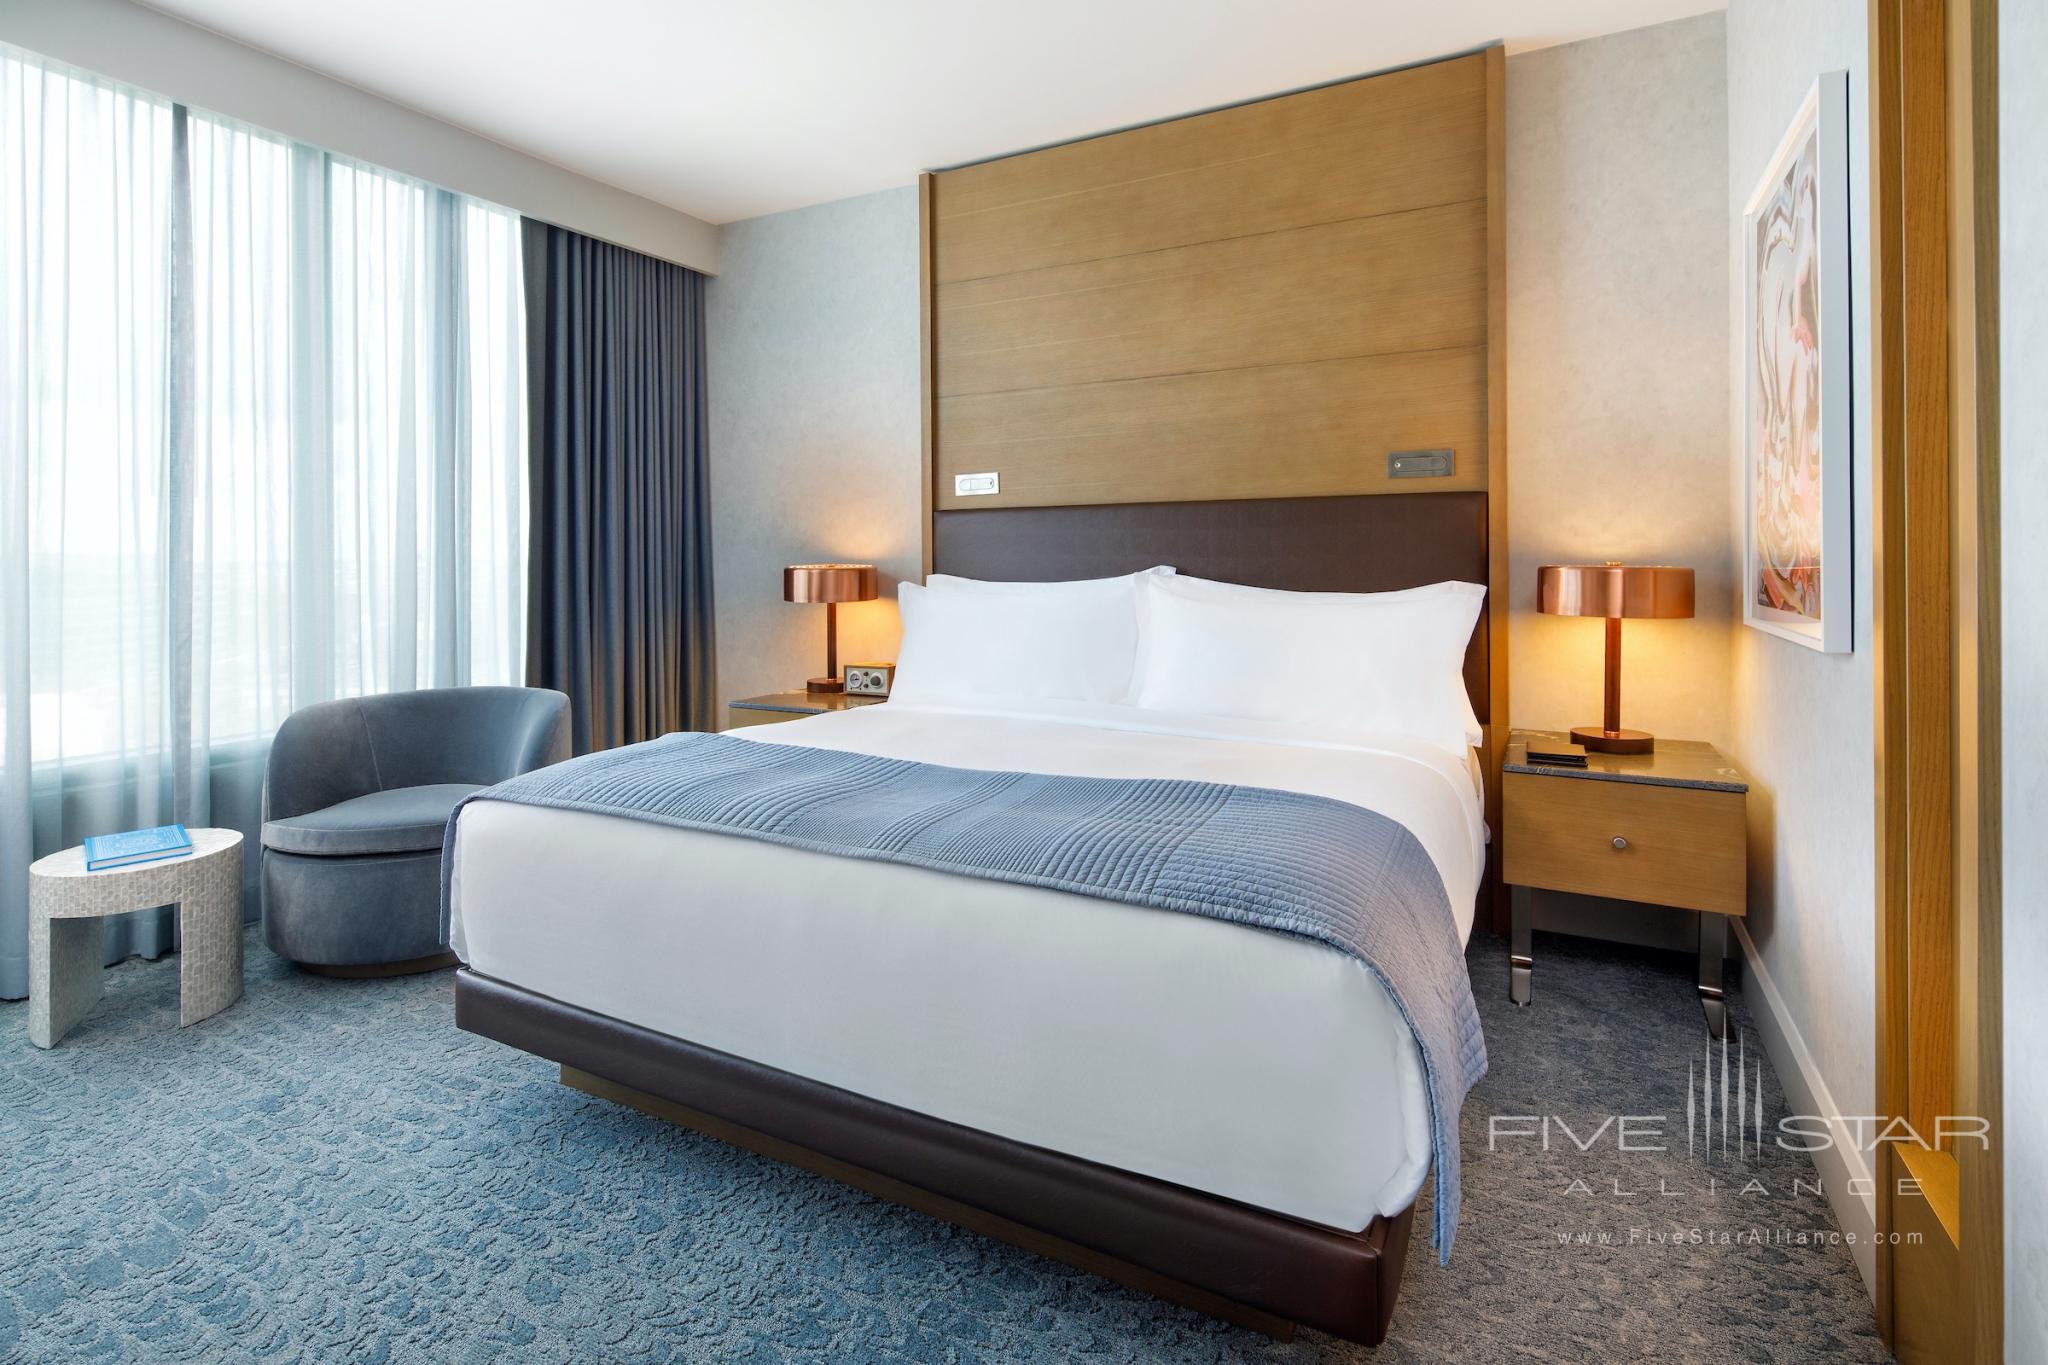 Guest rooms at The Joseph Hotel in Nashville offer inviting beds, Frette linens, and elegant touches of oak, copper, leather, and marble throughout.